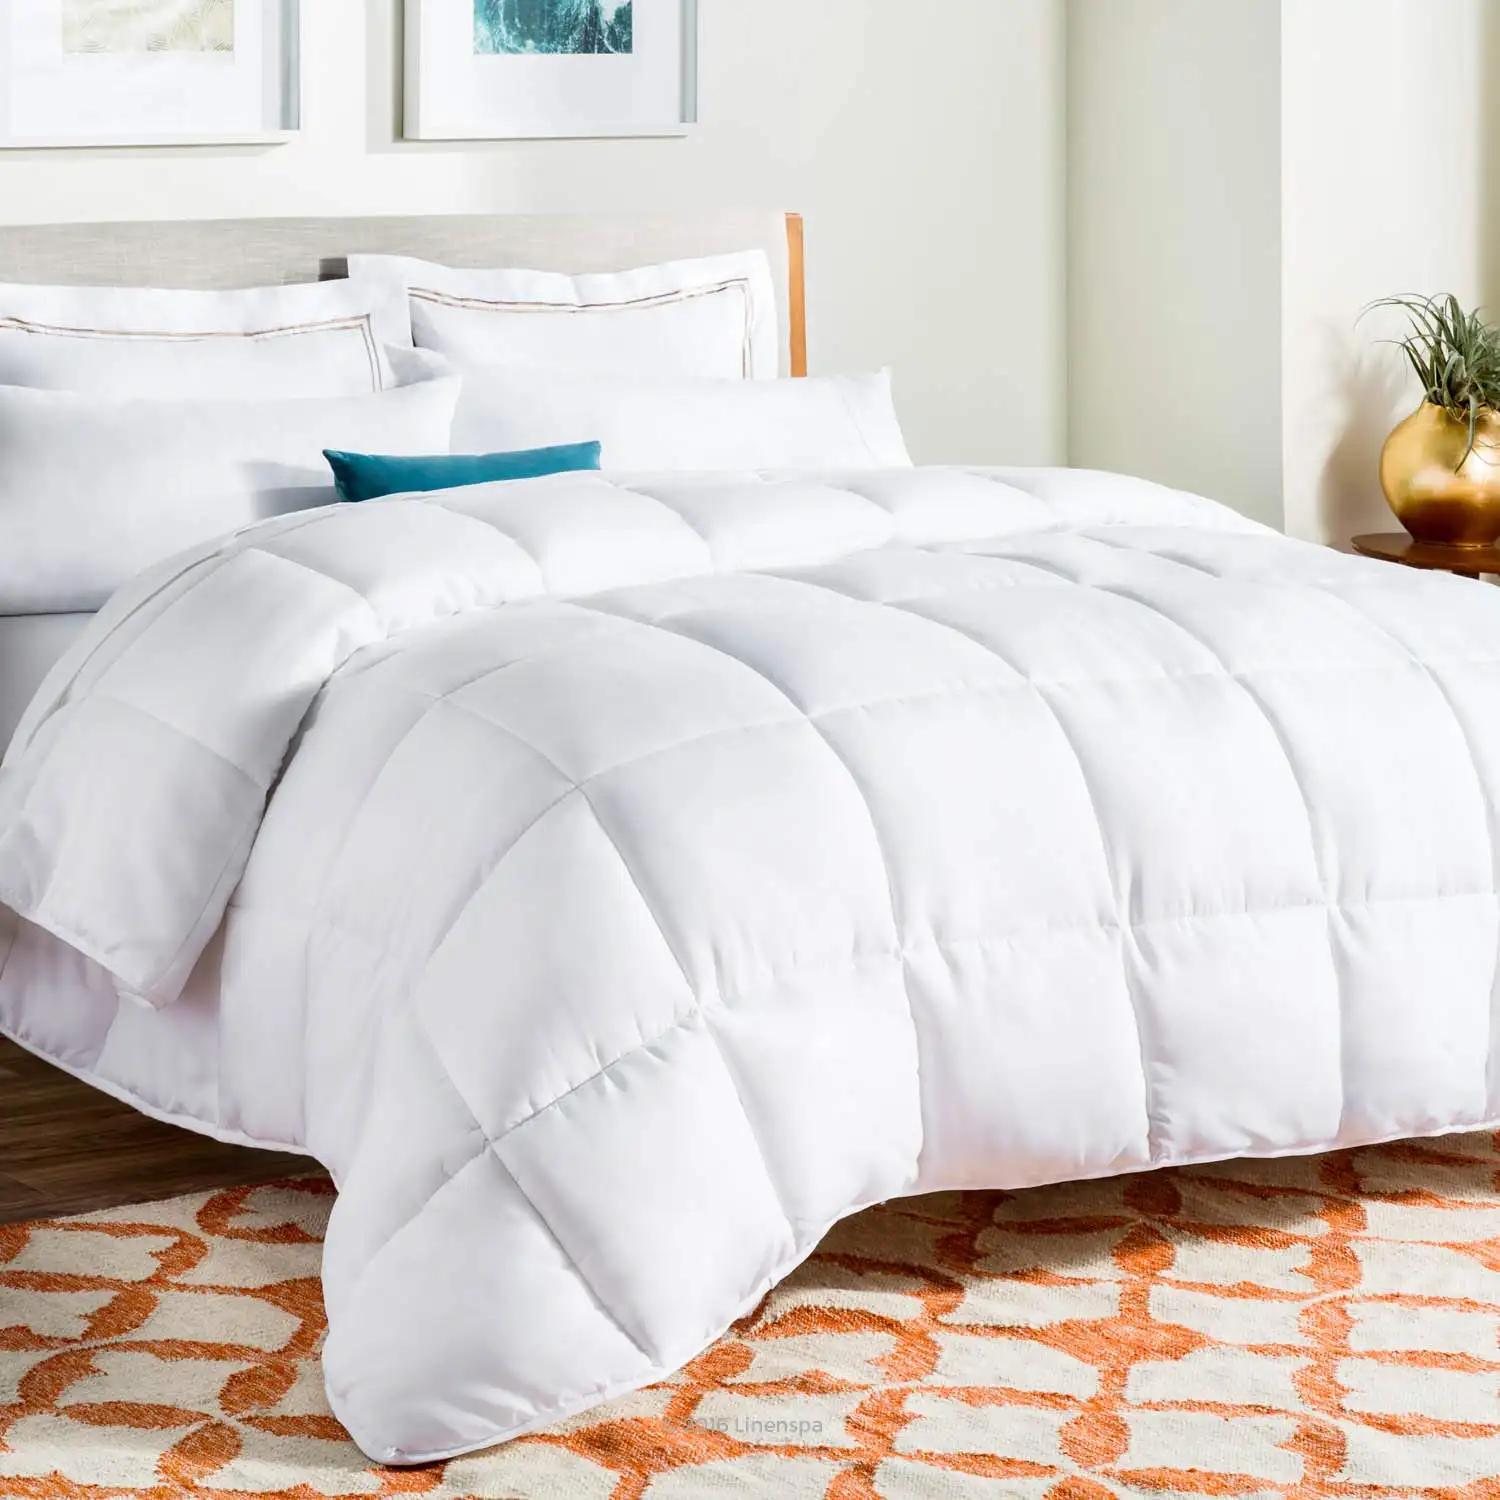 Machine Washable All- Season White Down Alternative Quilted Comforter Duvet Insert or Comforter quilt for twin Size